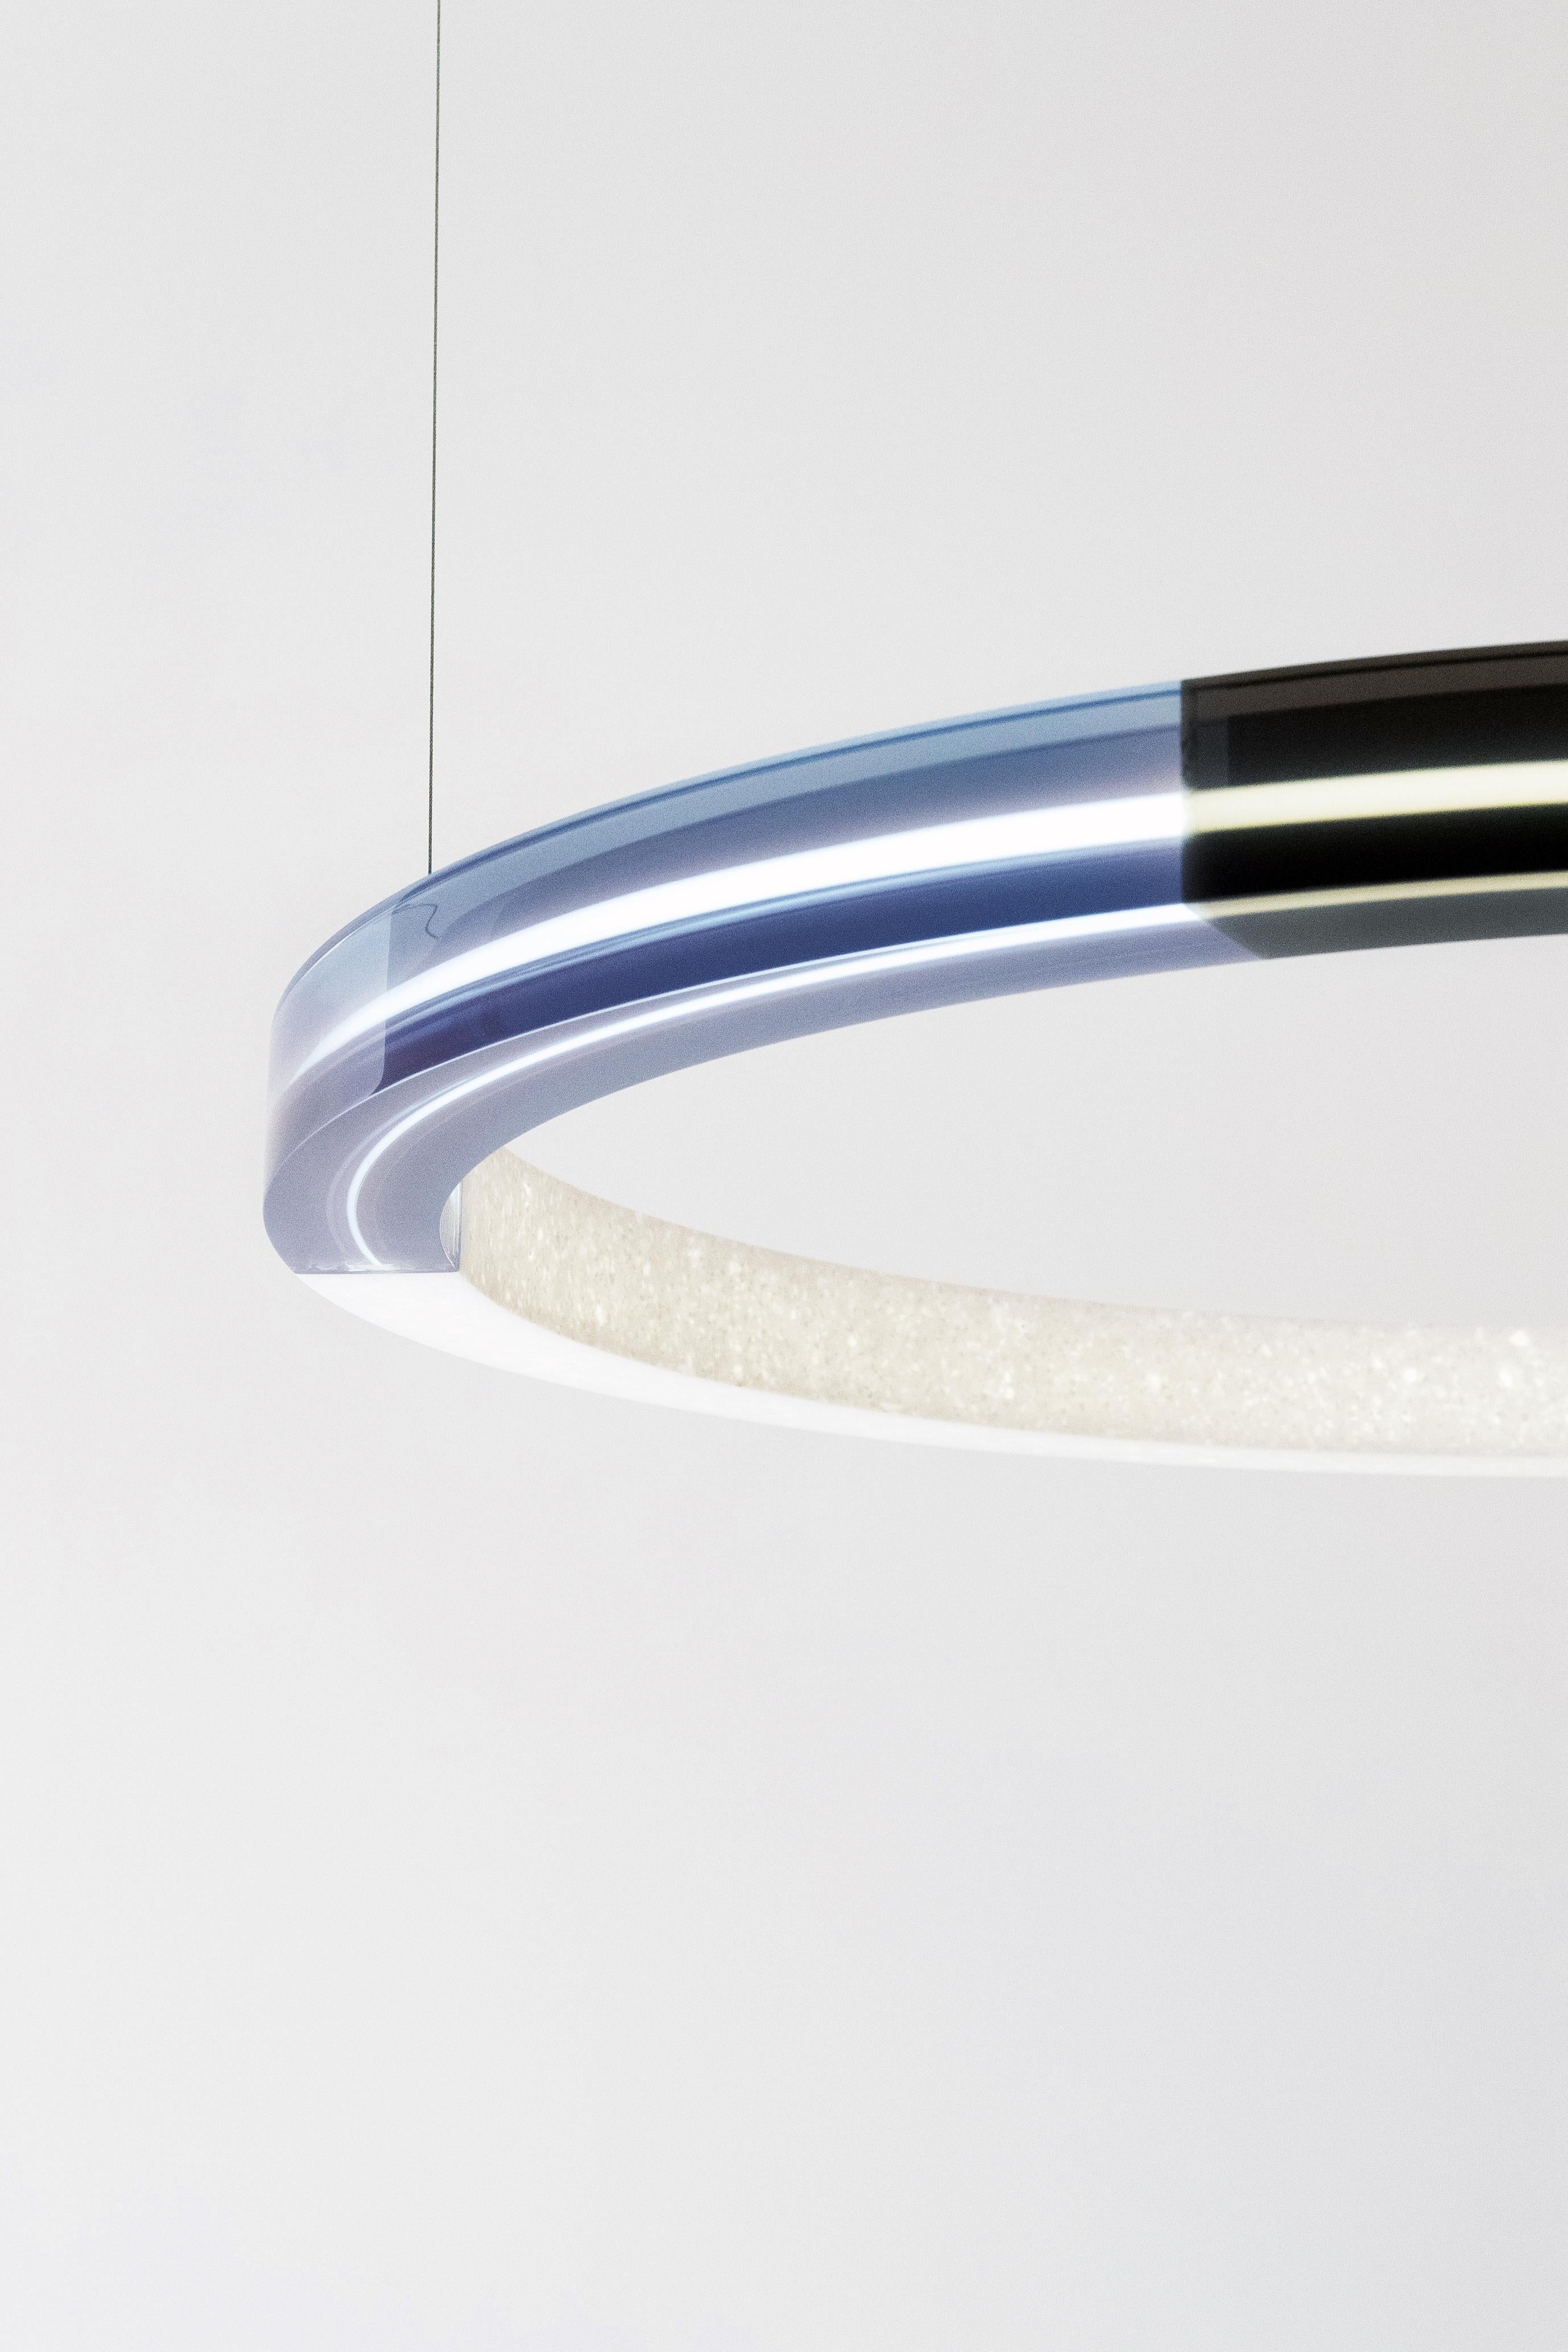 Sabine Marcelis chandelier from the Filter series in color blue.
Made from resin, high macs and neon.
Manufactured by Sabine Marcelis.
Produced exclusively for SIDE GALLERY.
Made in, Rotterdam, The Netherlands in 2020.
High macs, cast resin,